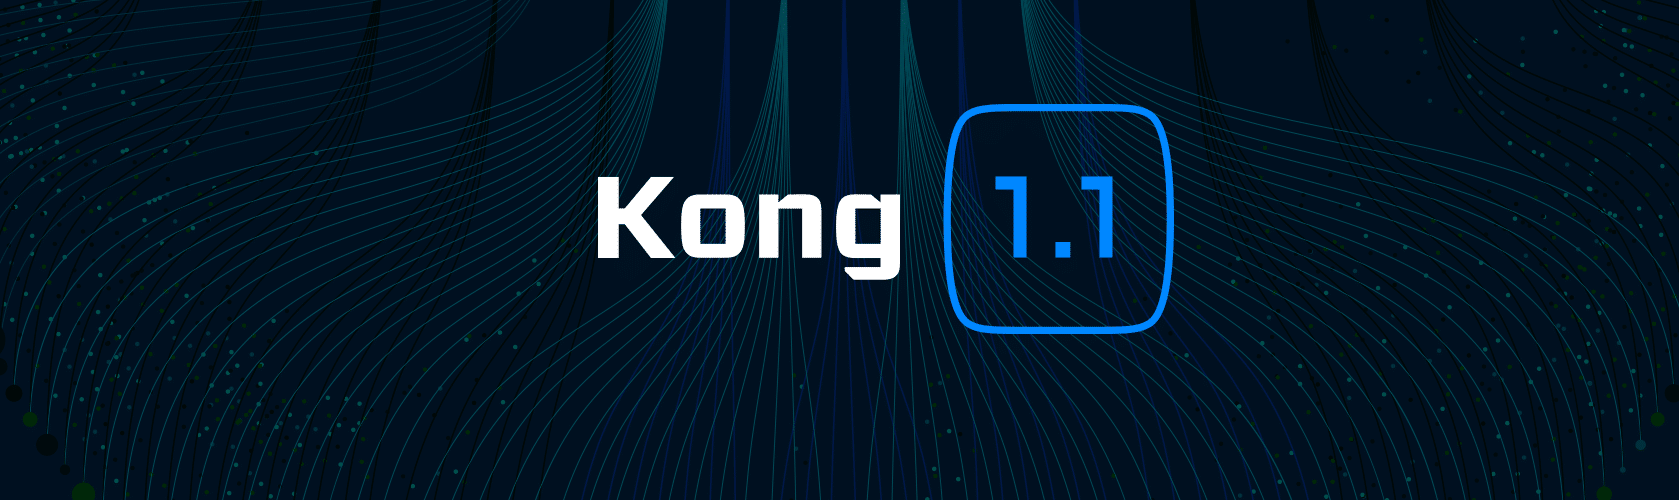 Kong 1.1 Released!